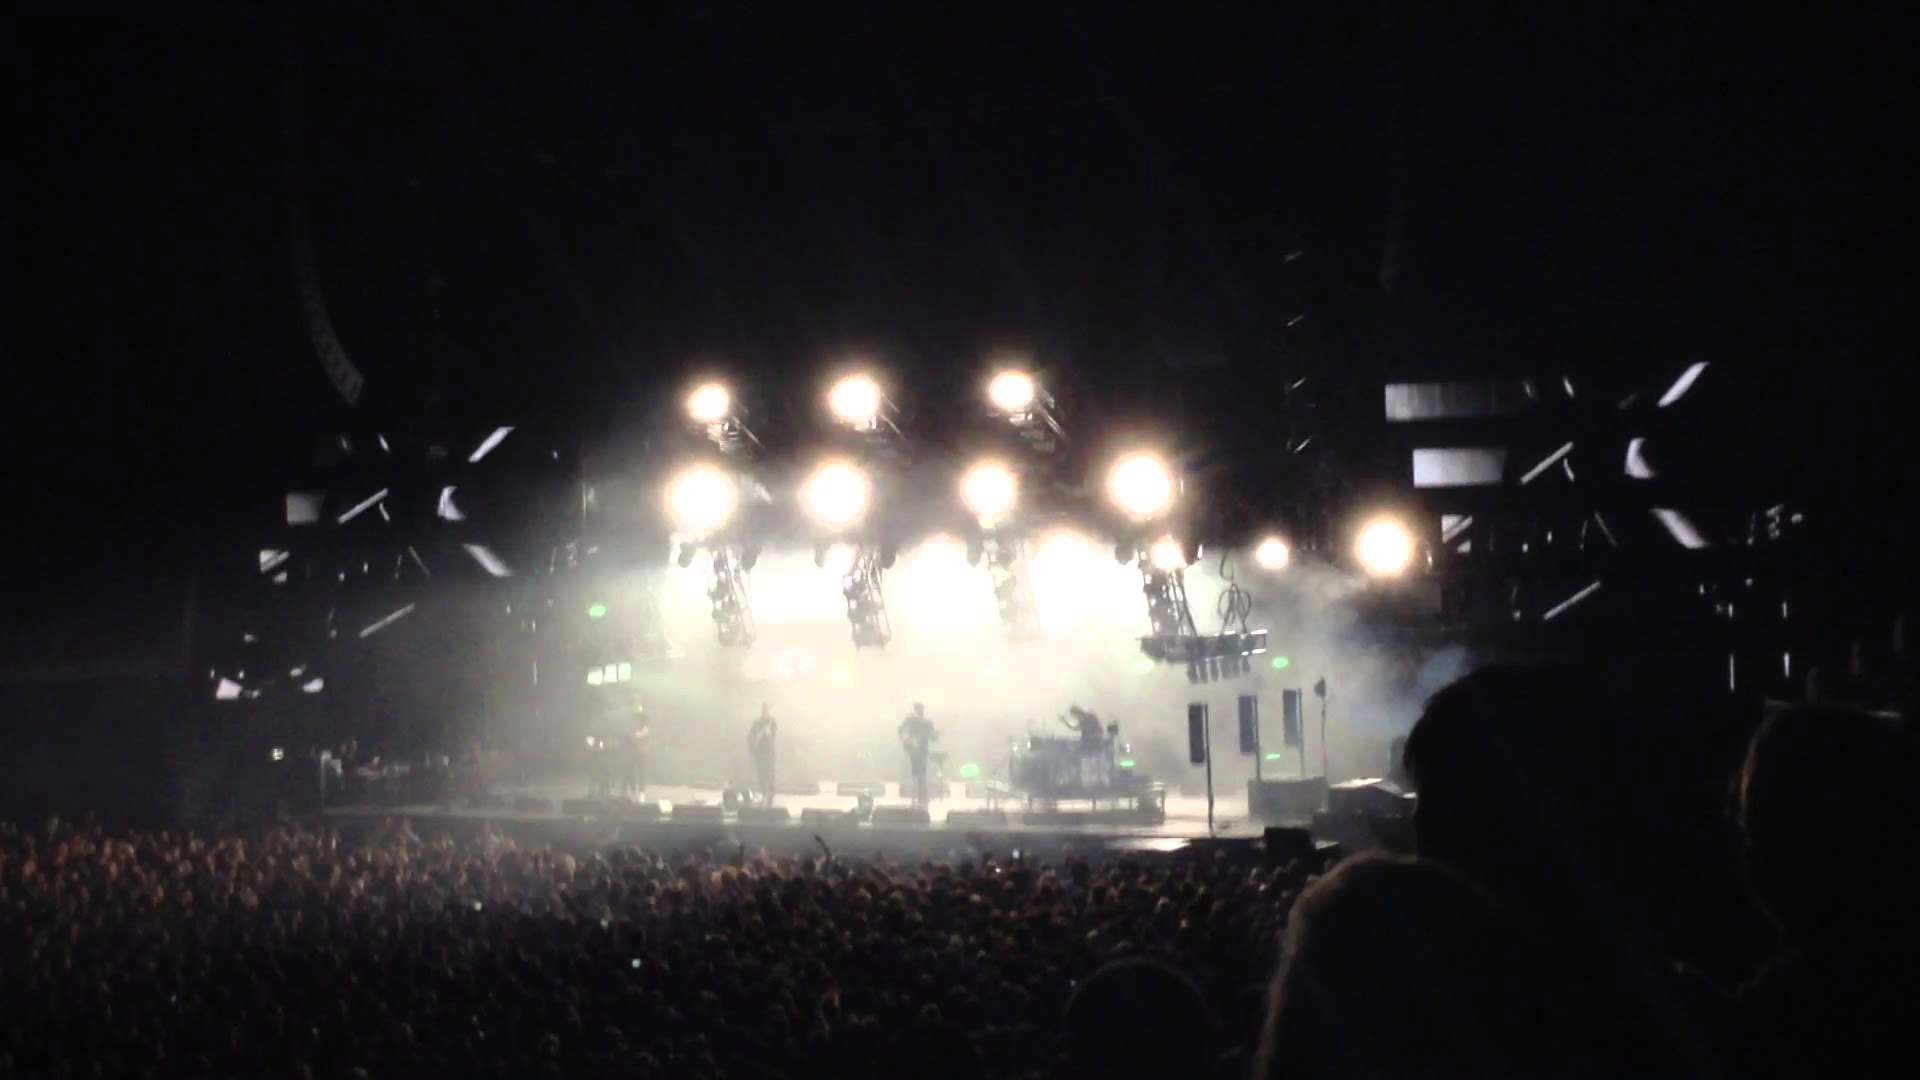 1920x1080 Alt-J perform "Every Other Freckle" live at the O2 Arena, London (24  January 2015)